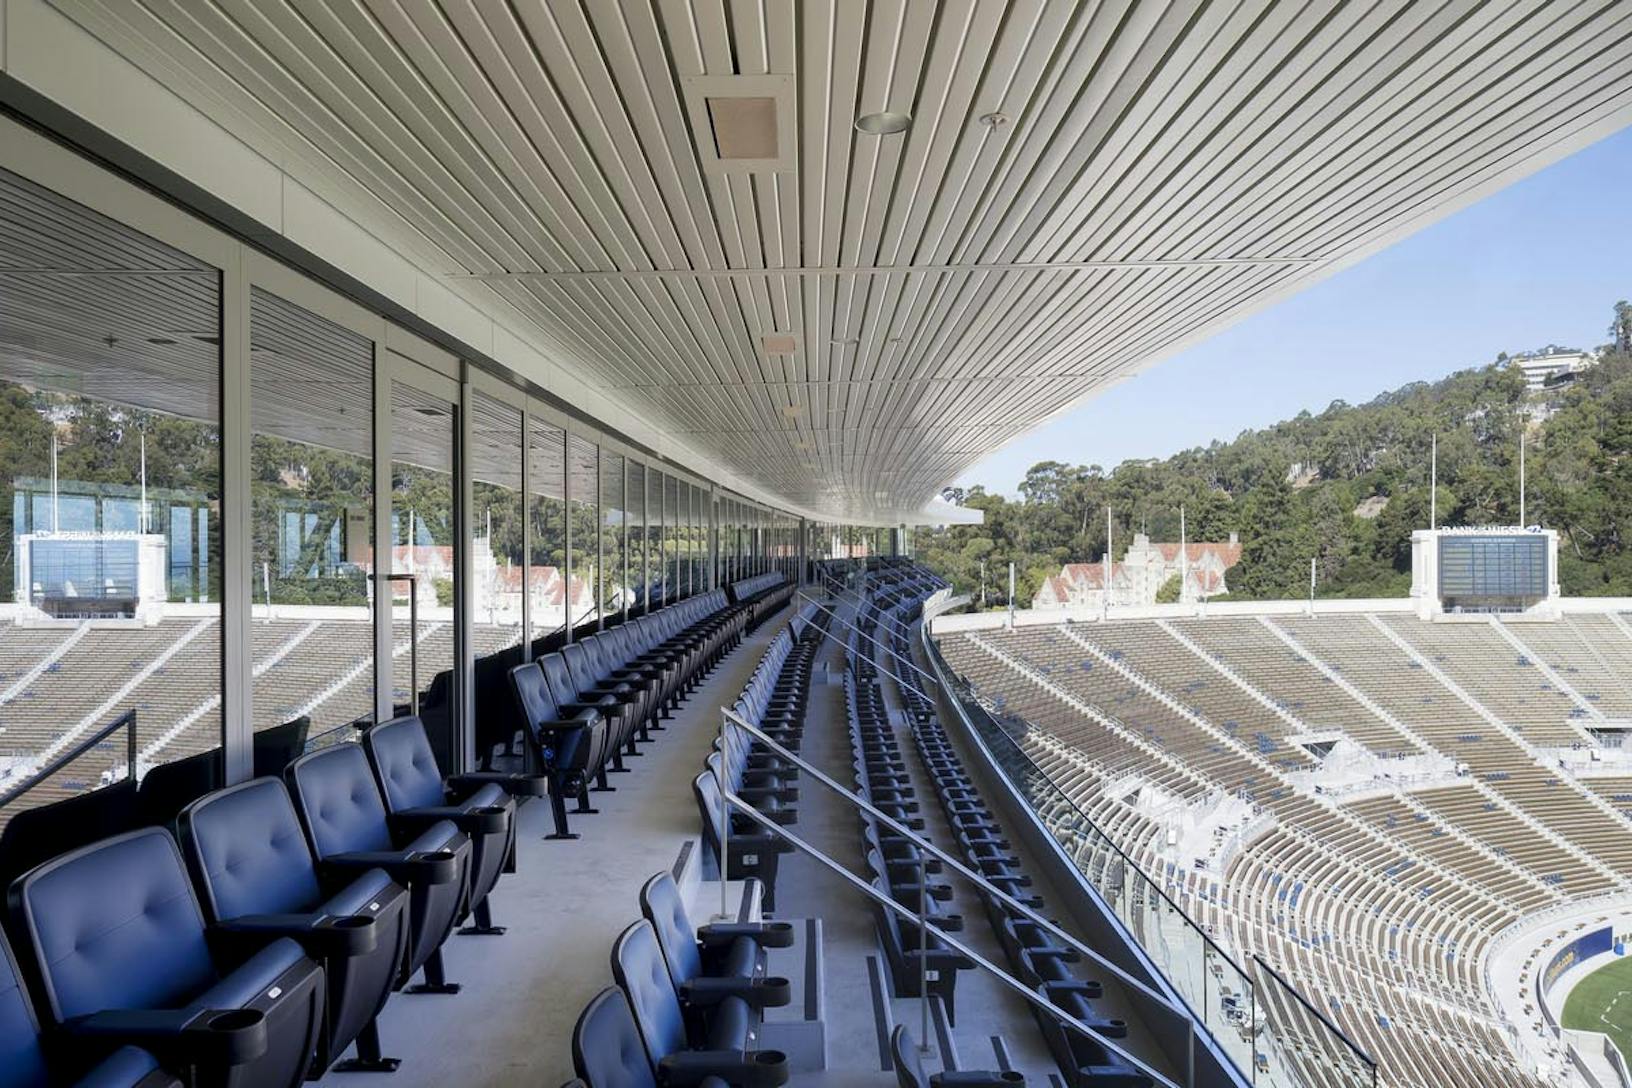 HSW60 commercial sliding glass walls at Cal Memorial Stadium